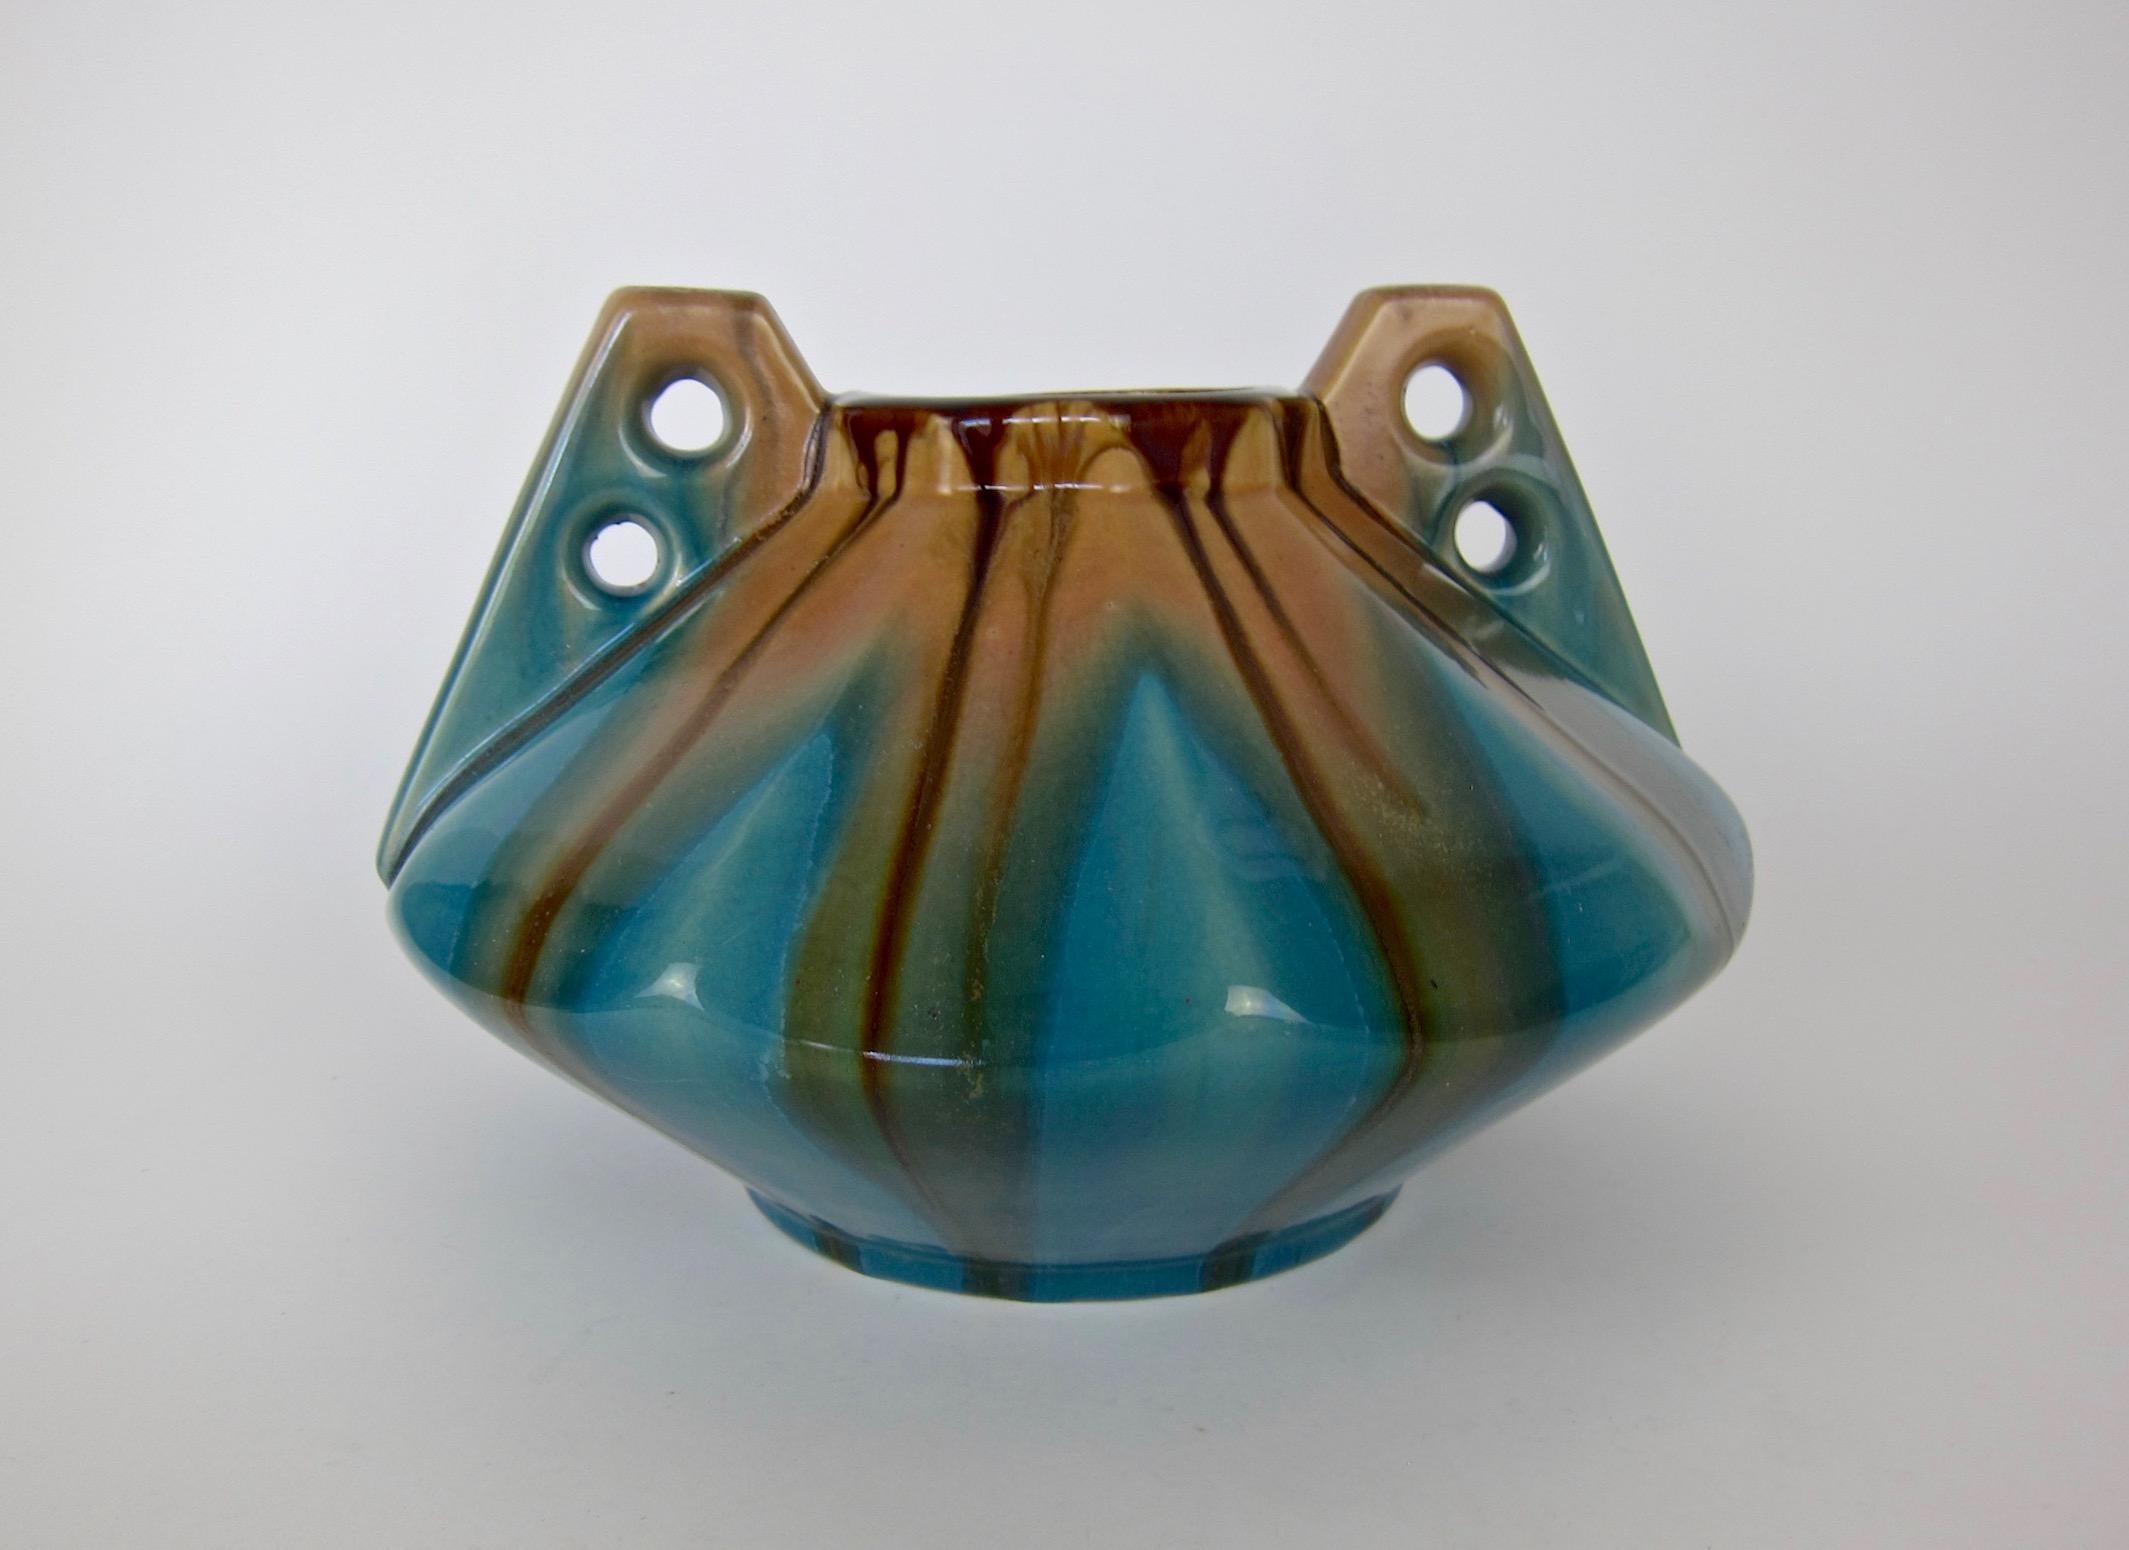 A large and sculptural Art Deco vase, made by Faiencerie Thulin of Belgium, circa 1930s. The vintage art pottery vessel was designed with a striking and angular Art Deco profile accented with with two buttressed handles and a glossy teal blue outer